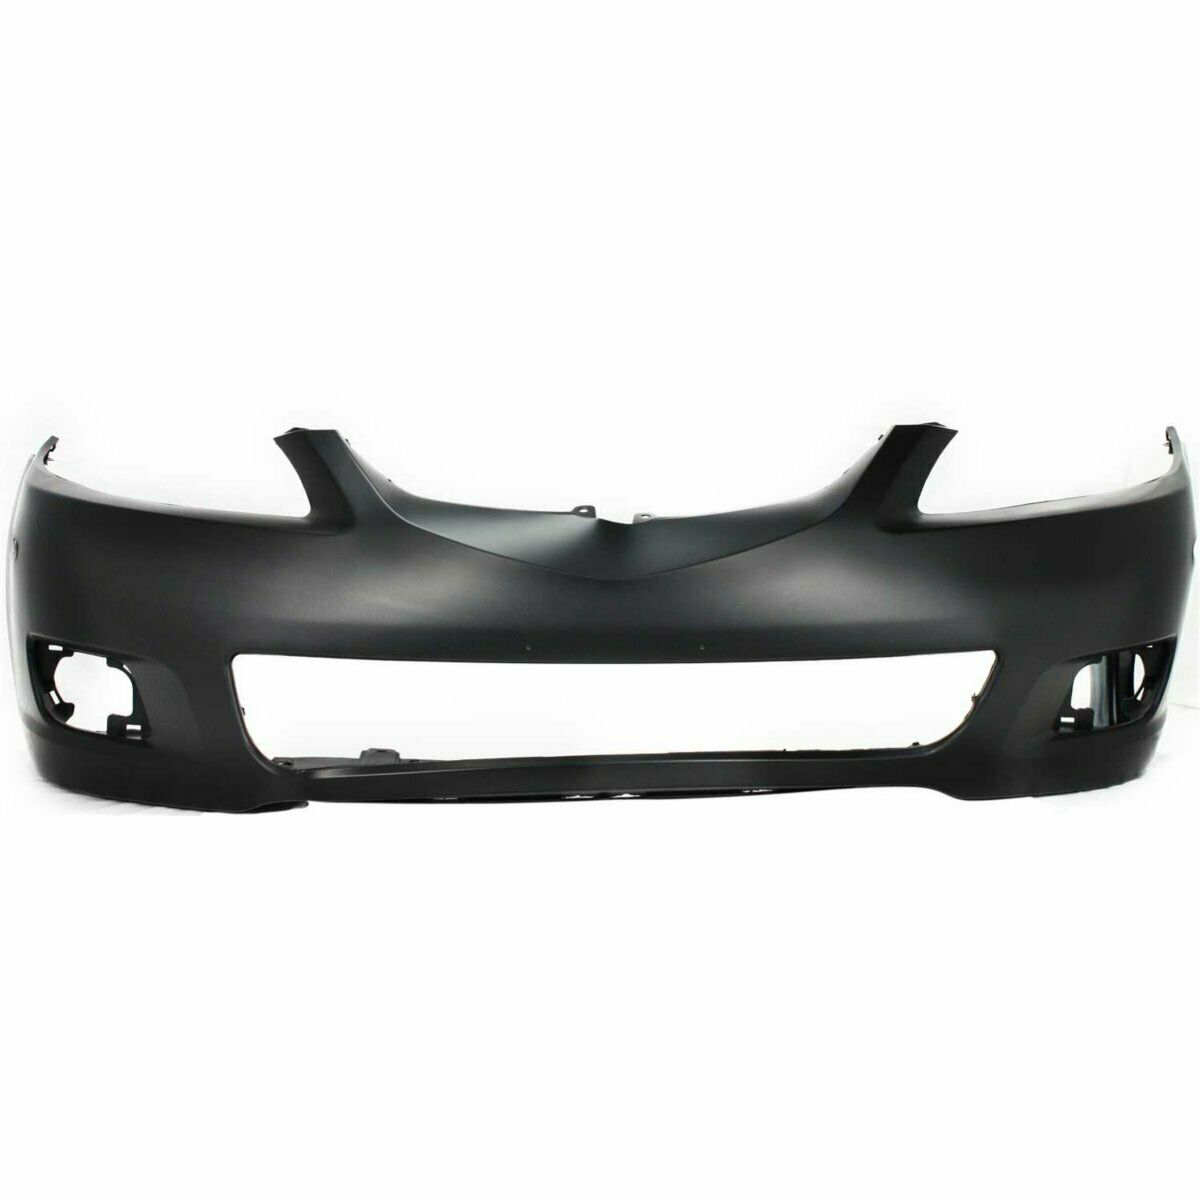 2006-2008 Mazda 6 Front Bumper Painted to Match